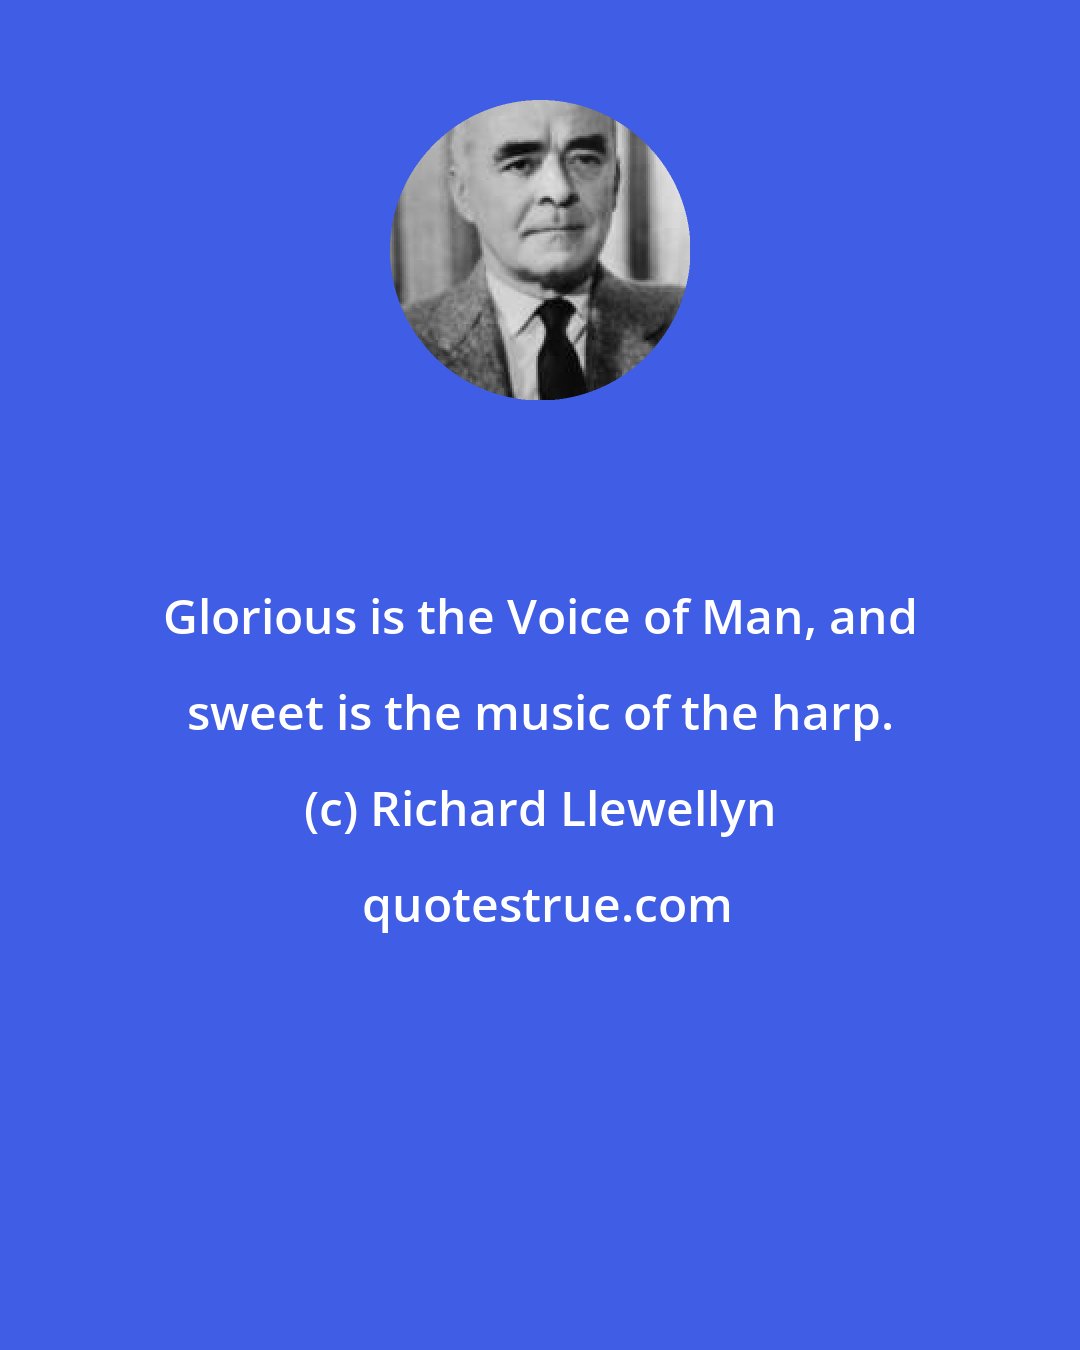 Richard Llewellyn: Glorious is the Voice of Man, and sweet is the music of the harp.